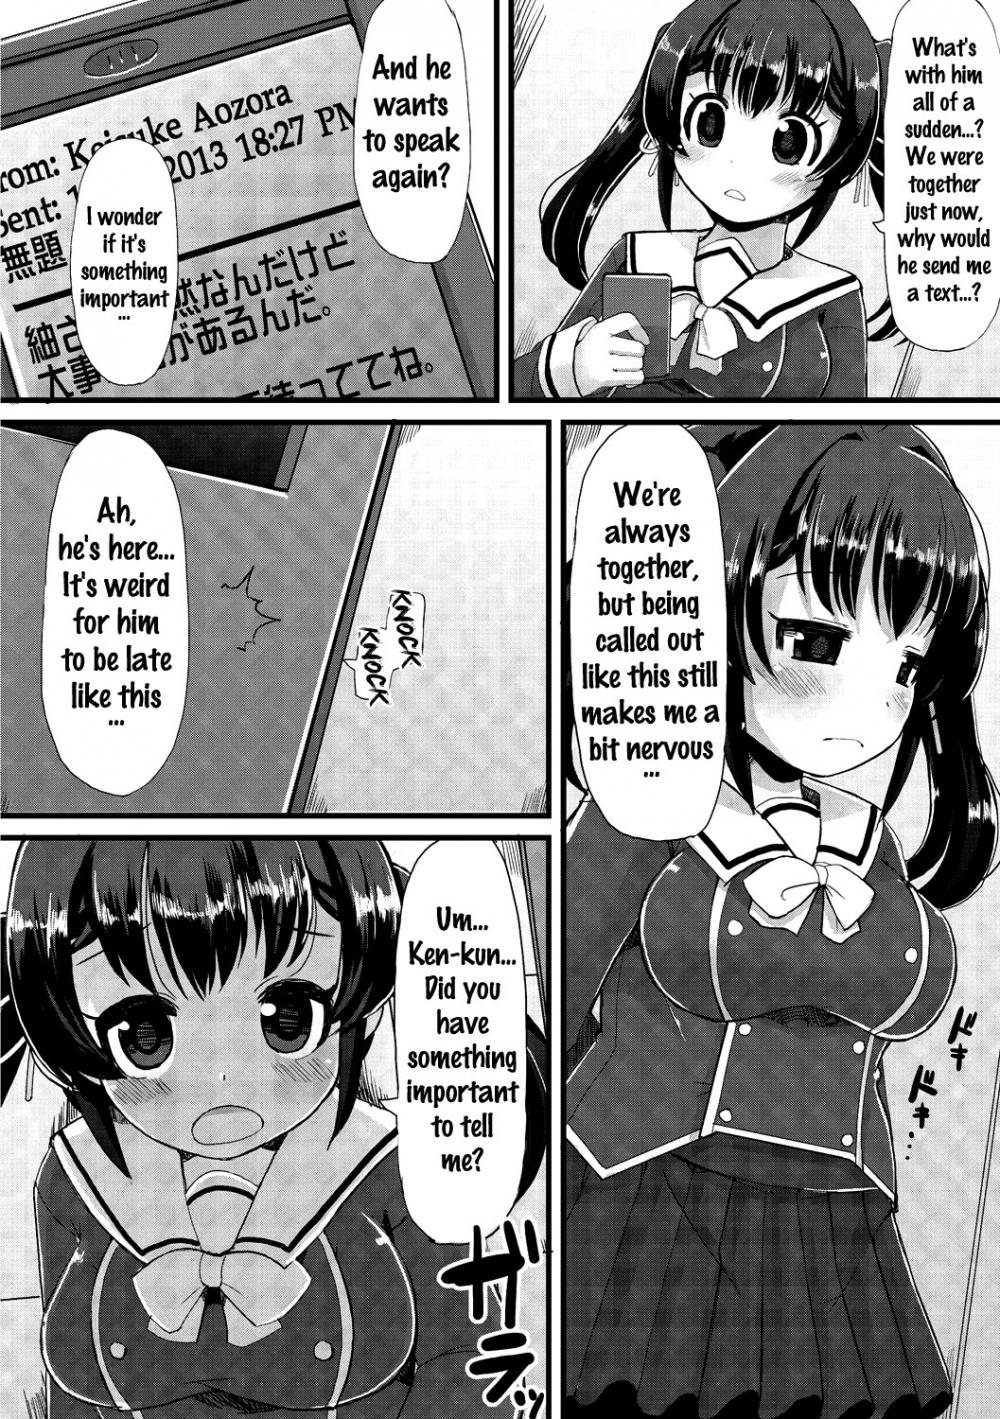 Hentai Manga Comic-A Large Breasted Honor Student Makes The Big Change to Perverted Masochist-Chapter 3-3